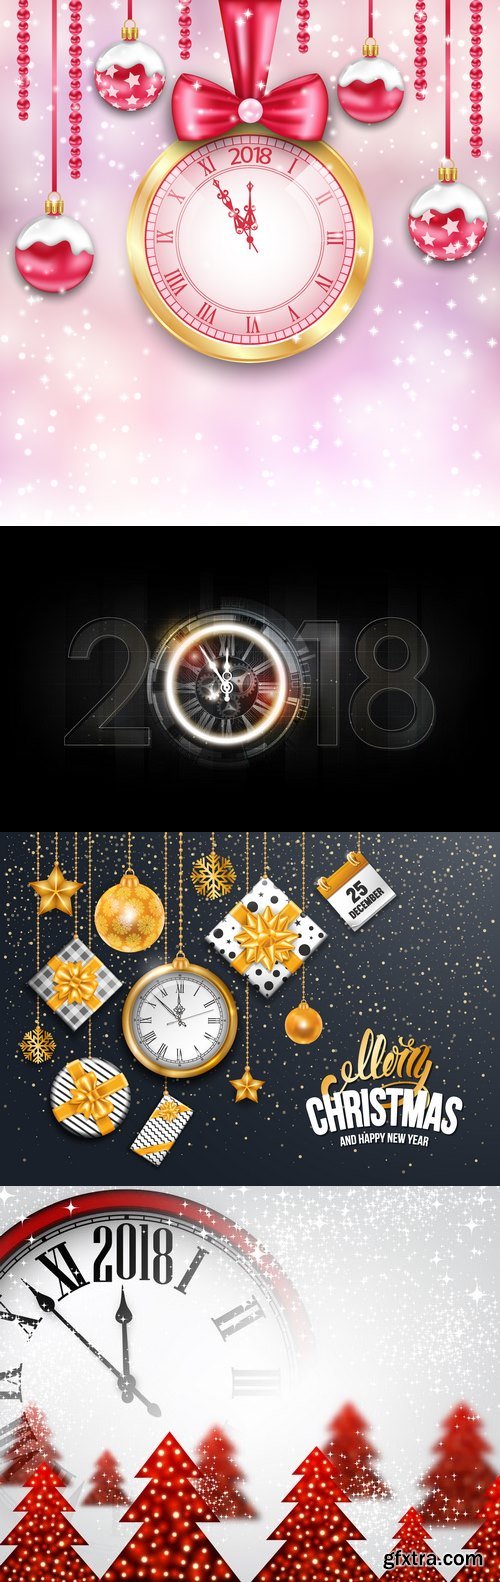 Vectors - 2018 Year Backgrounds with Clocks